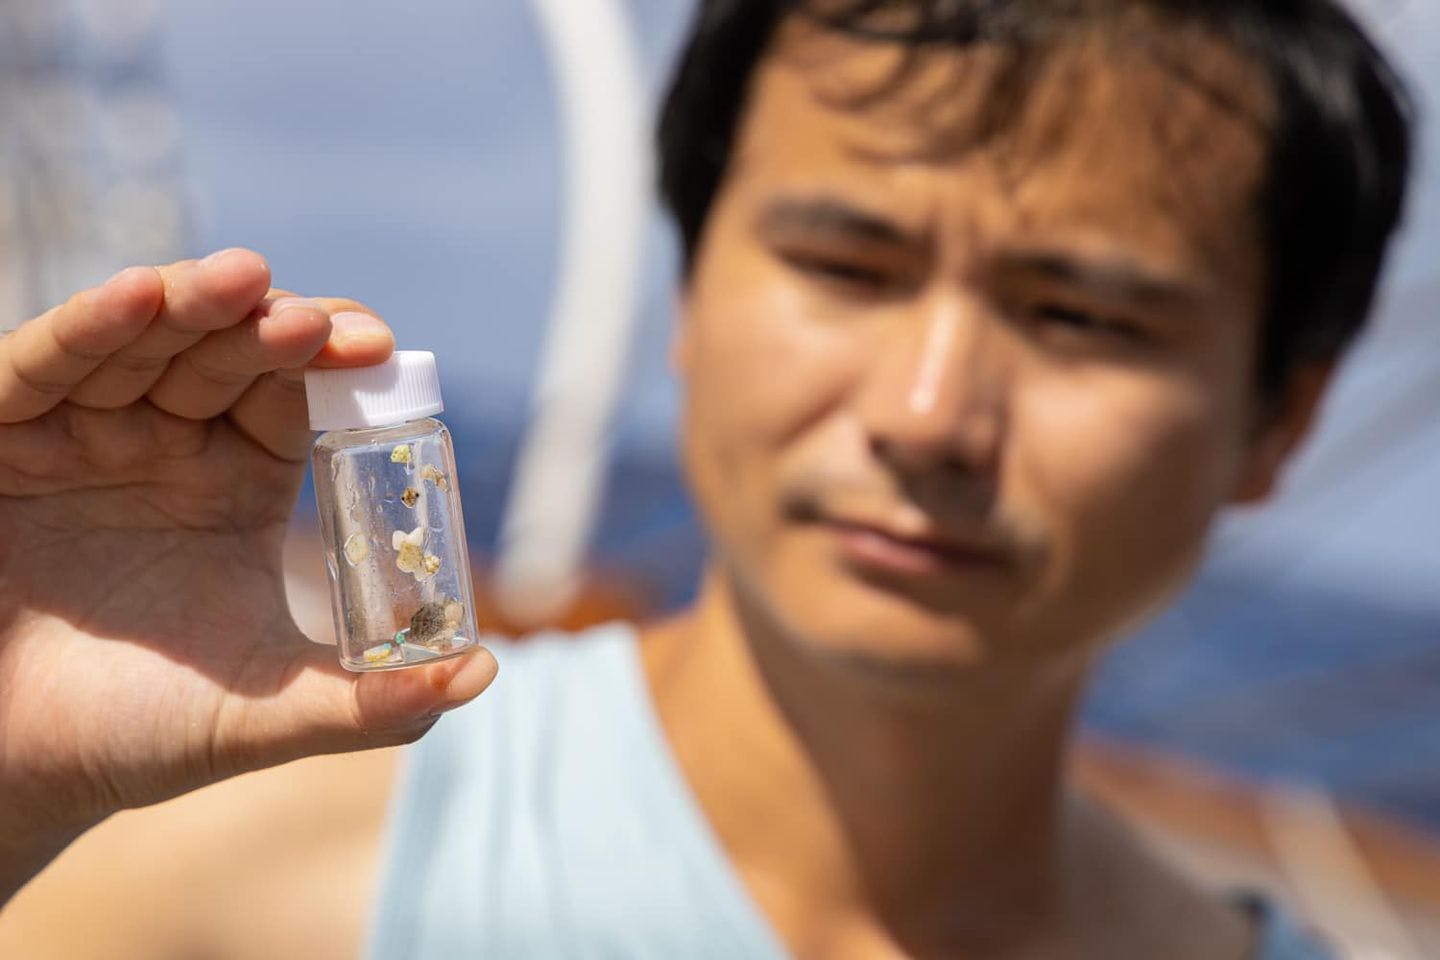 Shiye Zhao with a bottle containing microplastics. Photo: André Marton Pedersen